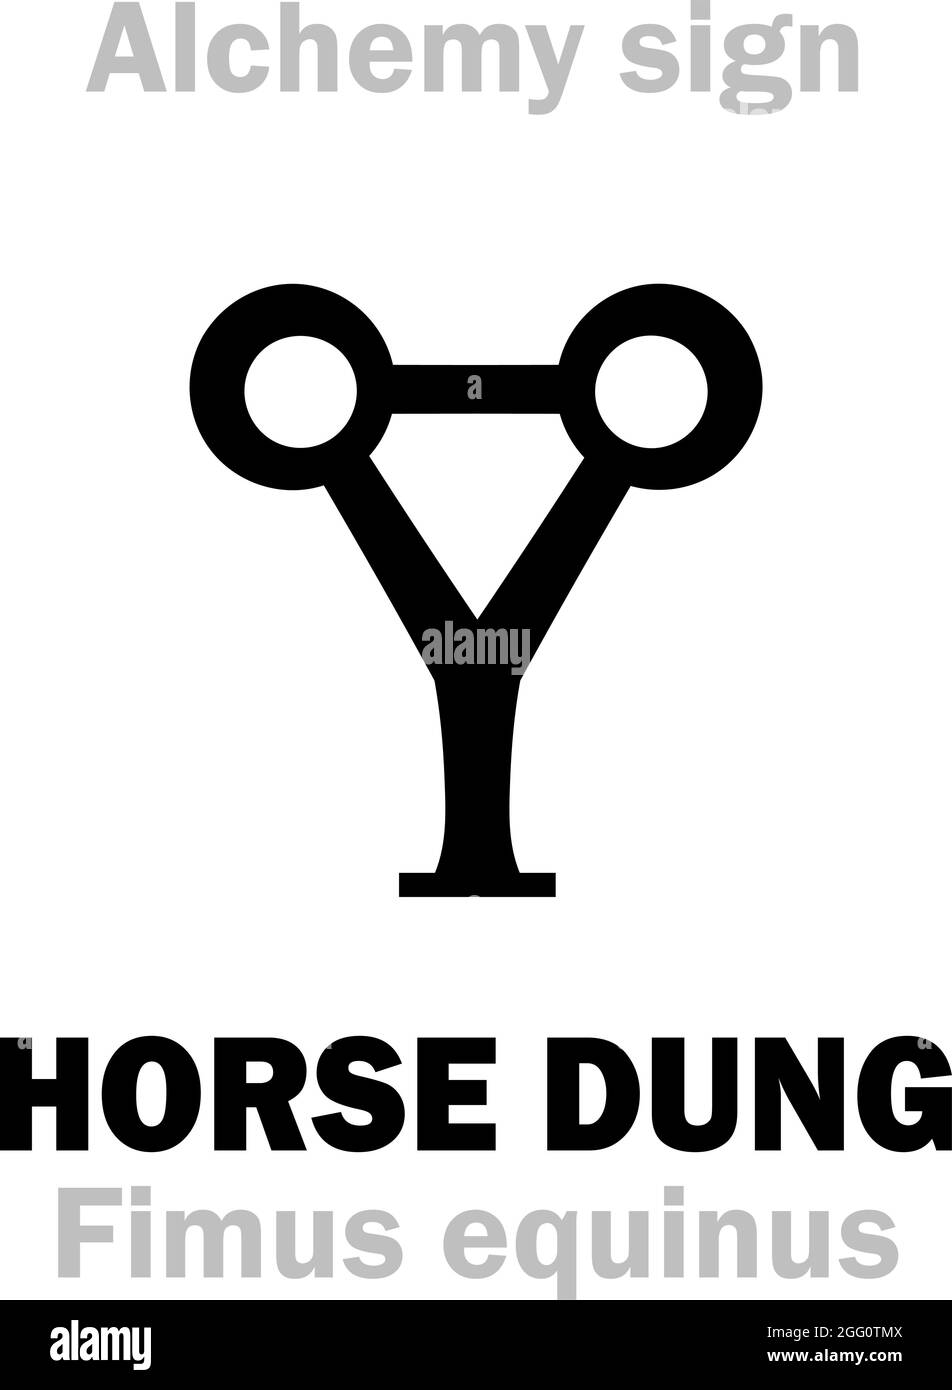 Alchemy Alphabet: HORSE DUNG (Fimus equinus), used by alchemists for constant warmth and fermentation. Alchemical sign, Medieval symbol. Stock Vector